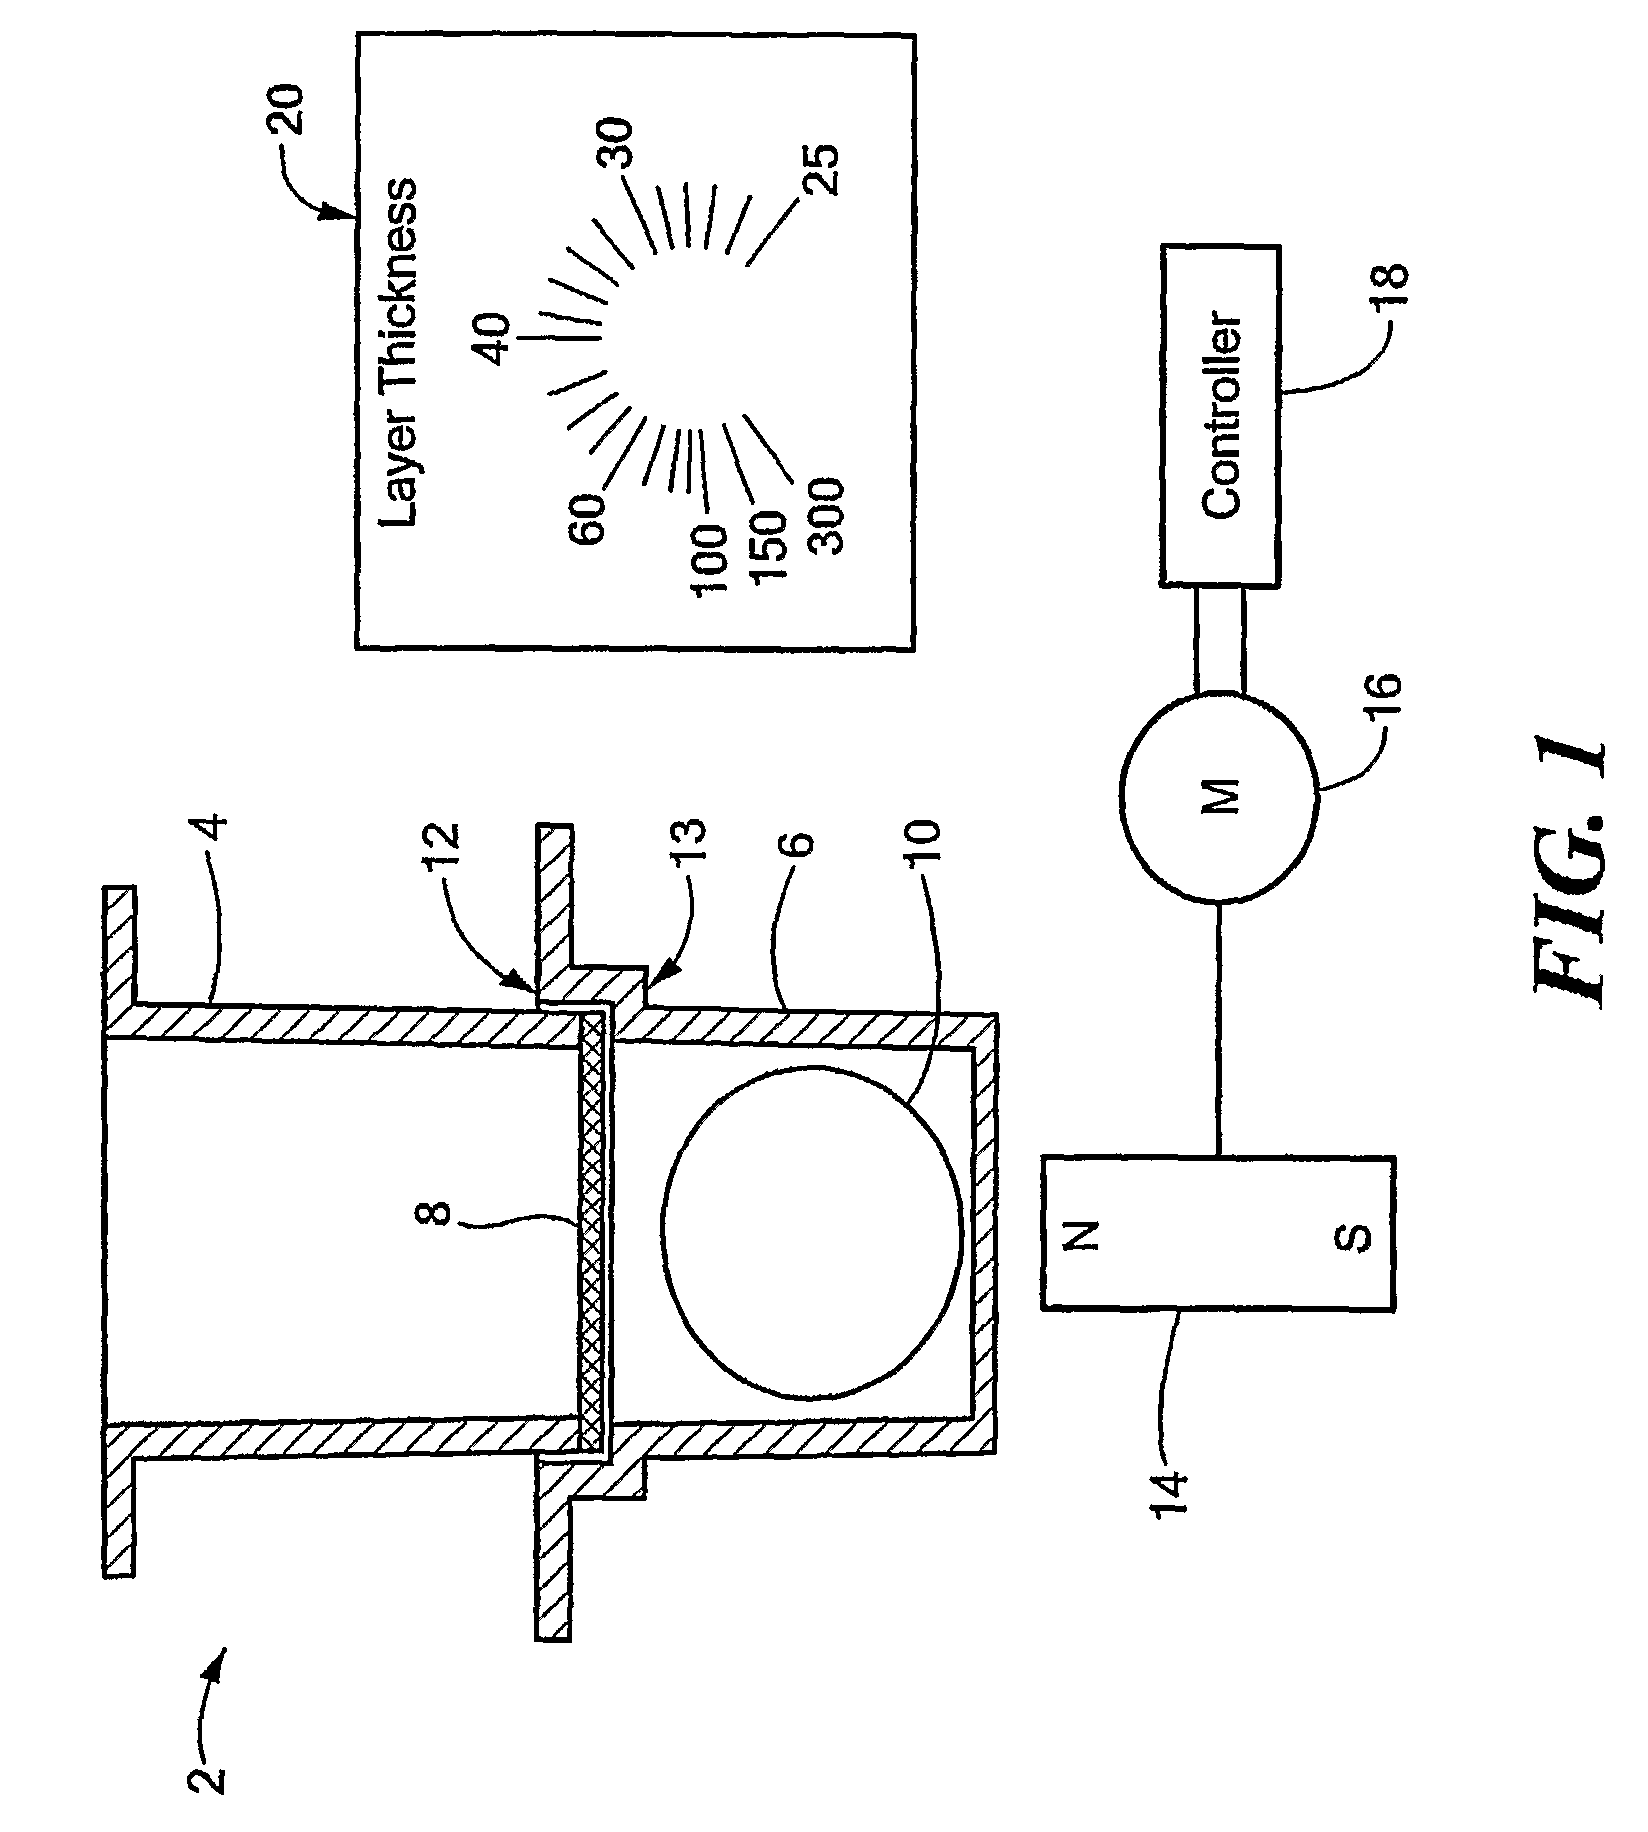 Permeation device and method for reducing aqueous boundary layer thicknesses